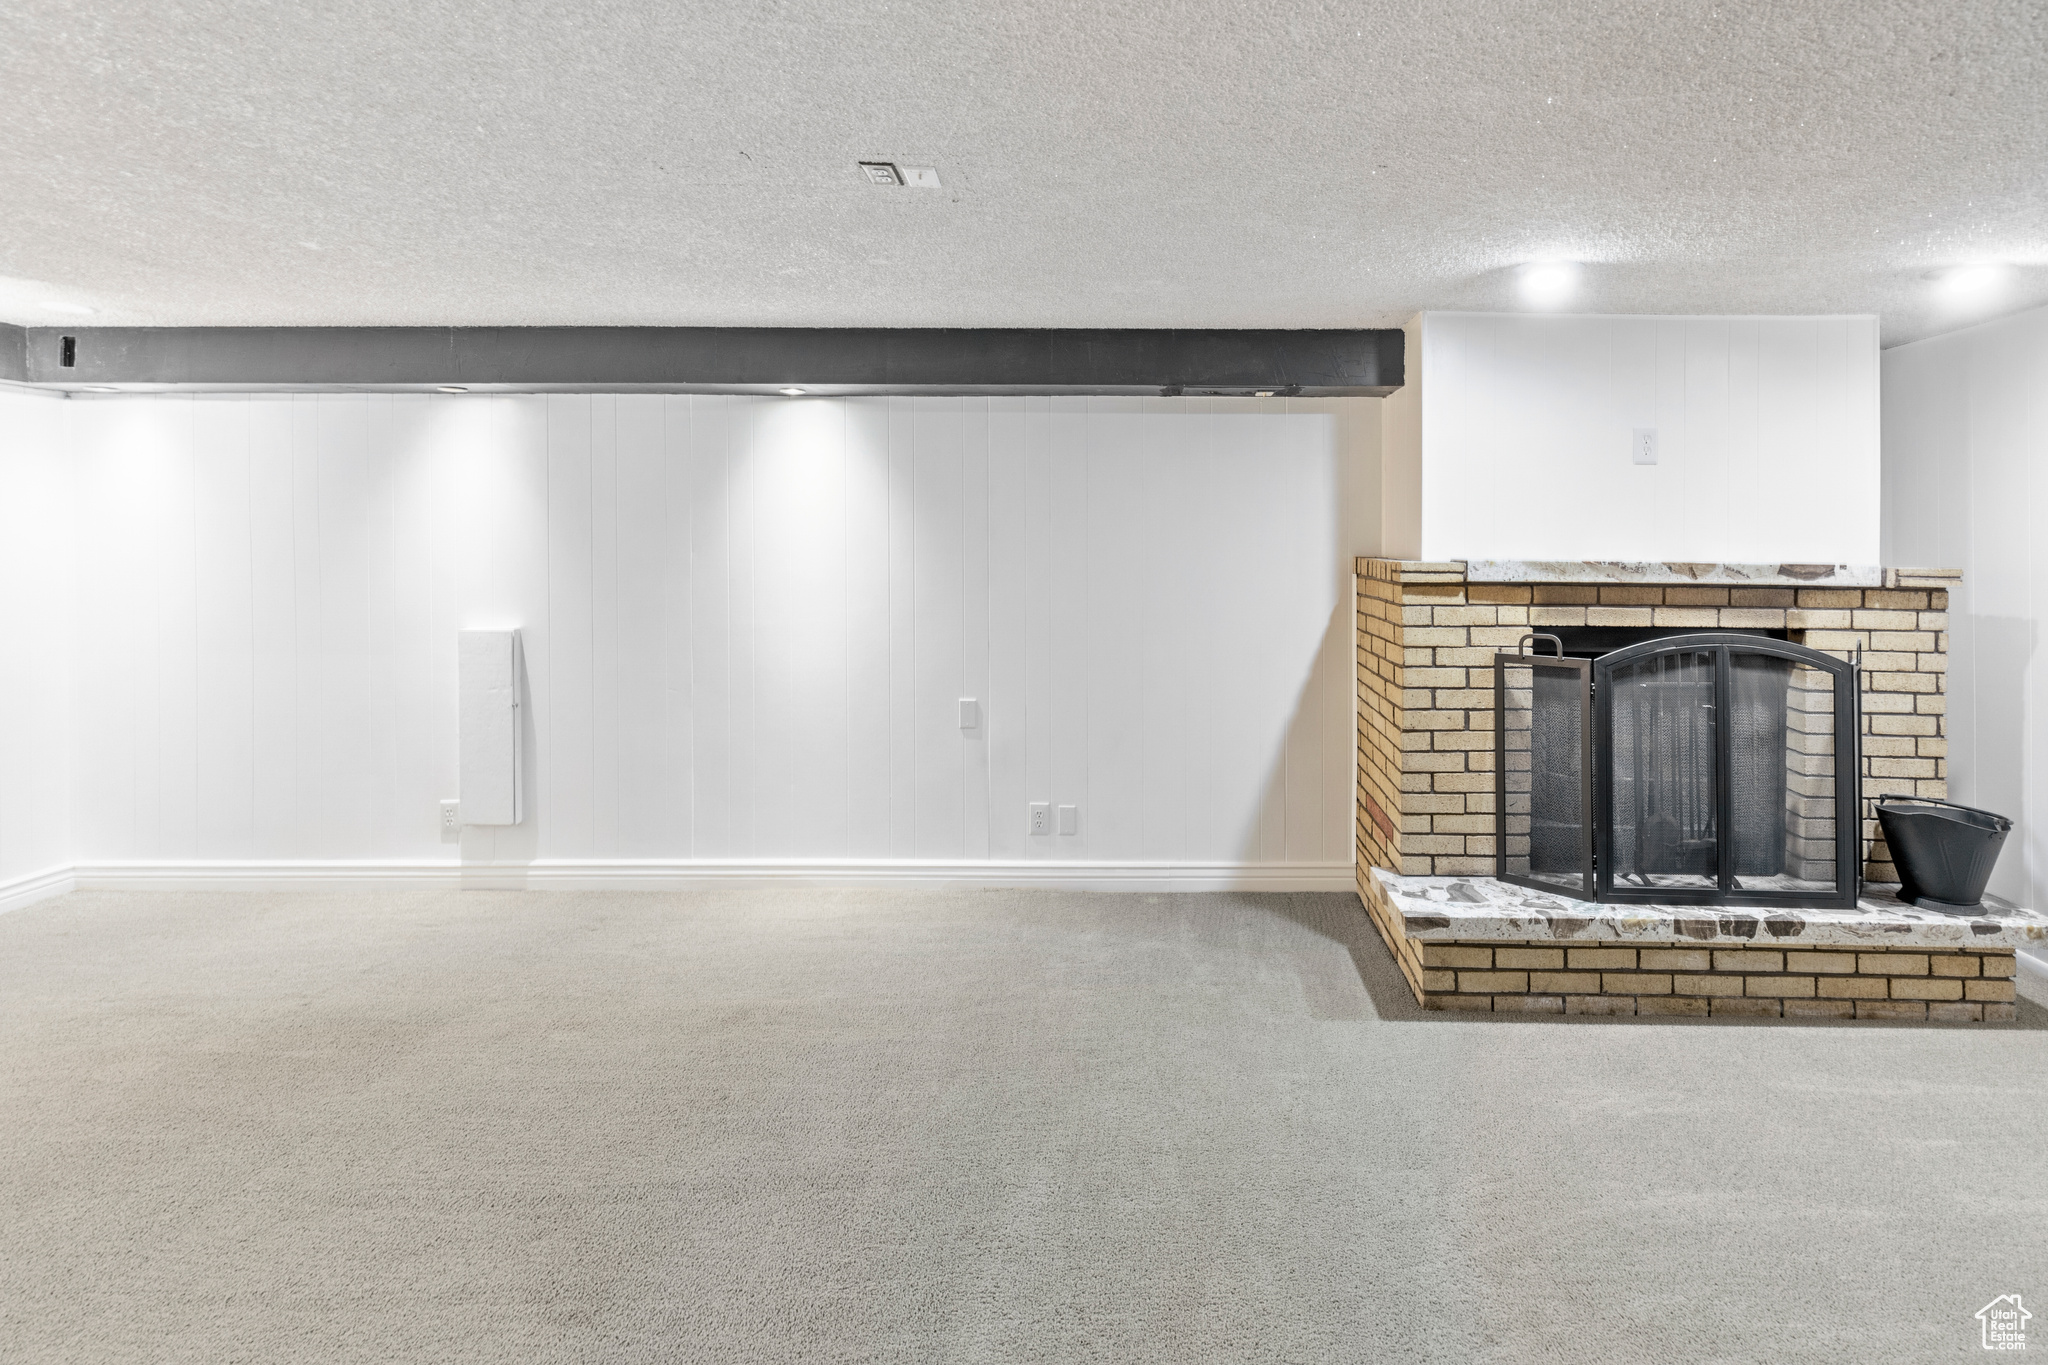 Unfurnished living room with a brick fireplace, carpet floors, and a textured ceiling